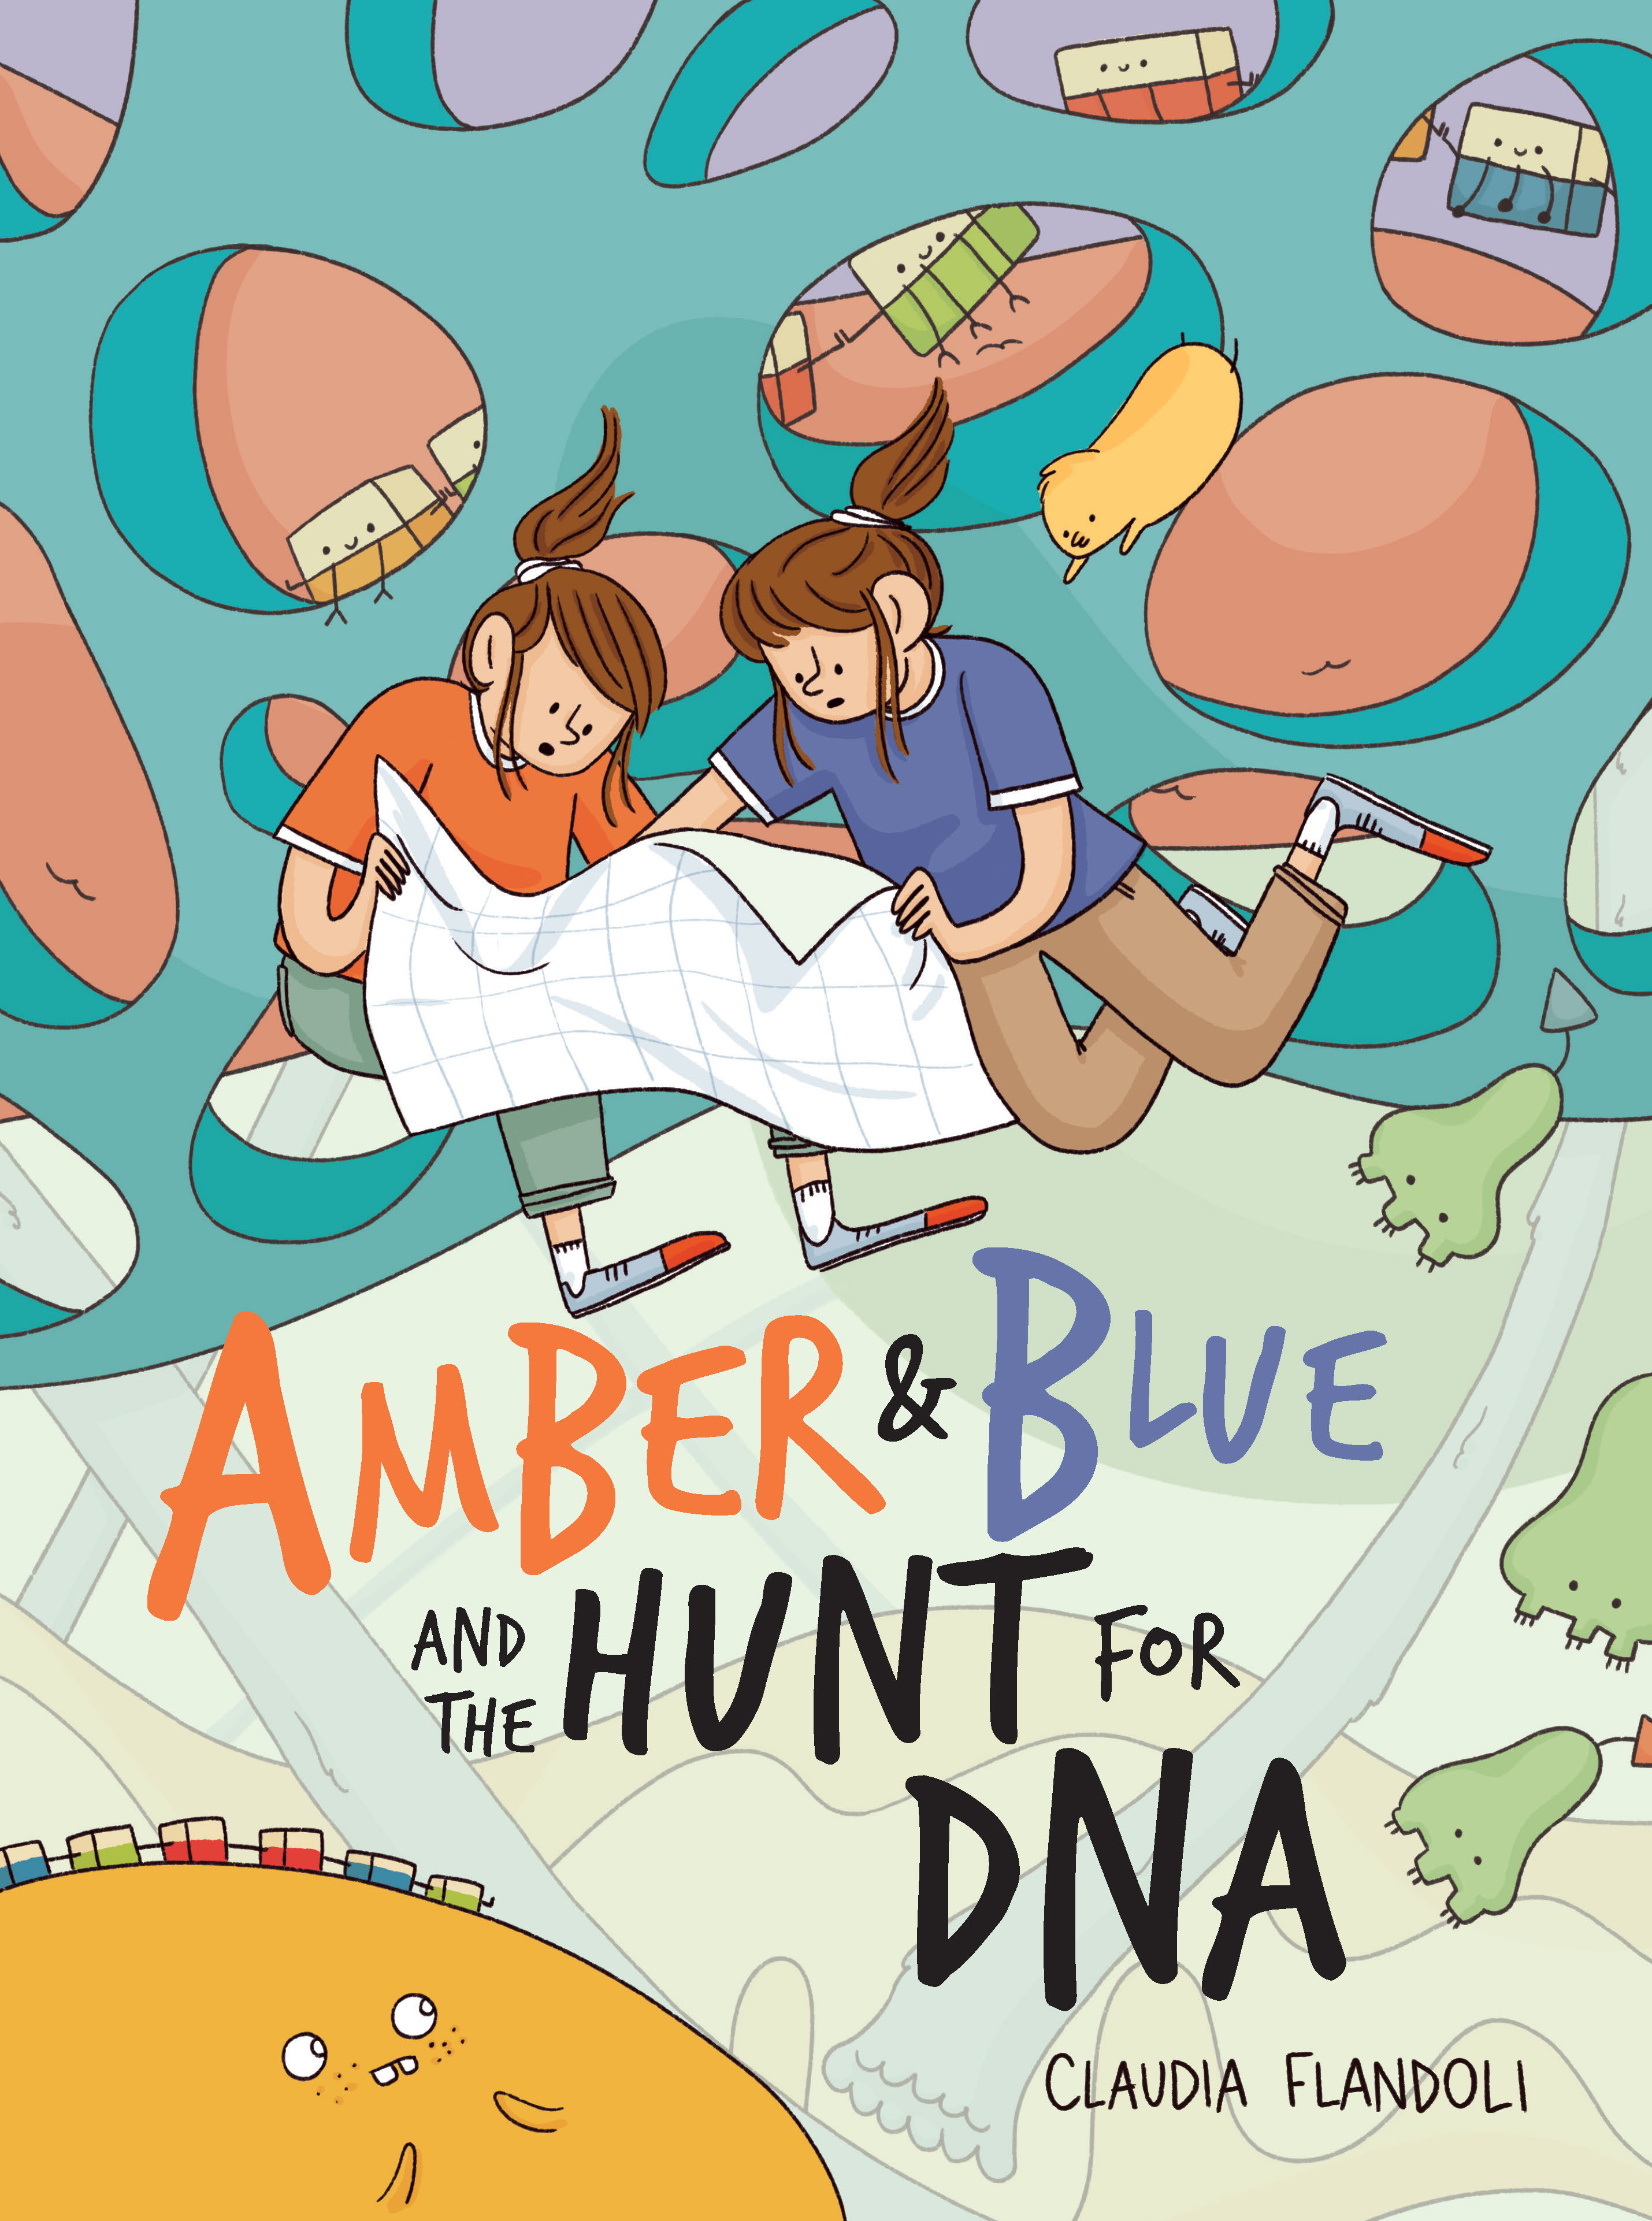 Amber & Blue and the Hunt for DNA